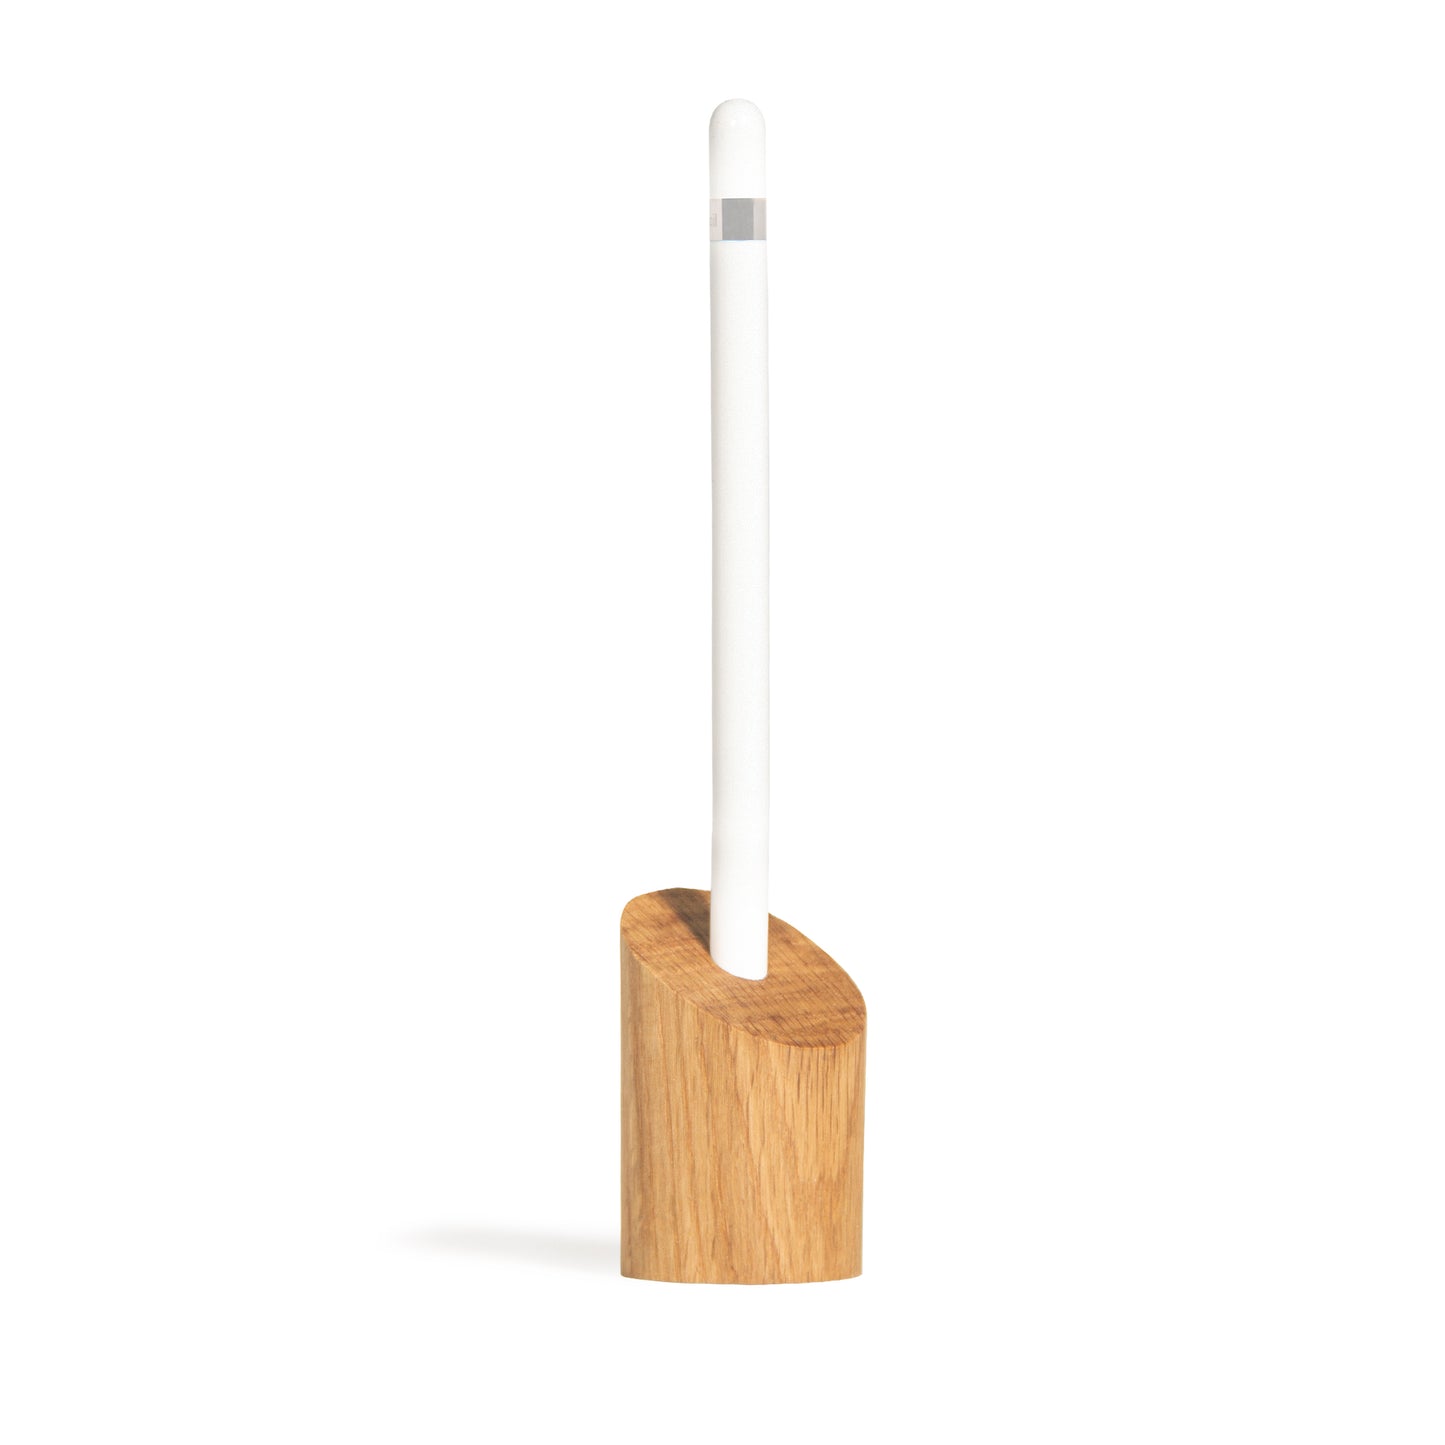 Sima Apple Pencil holder by woodendot over white background